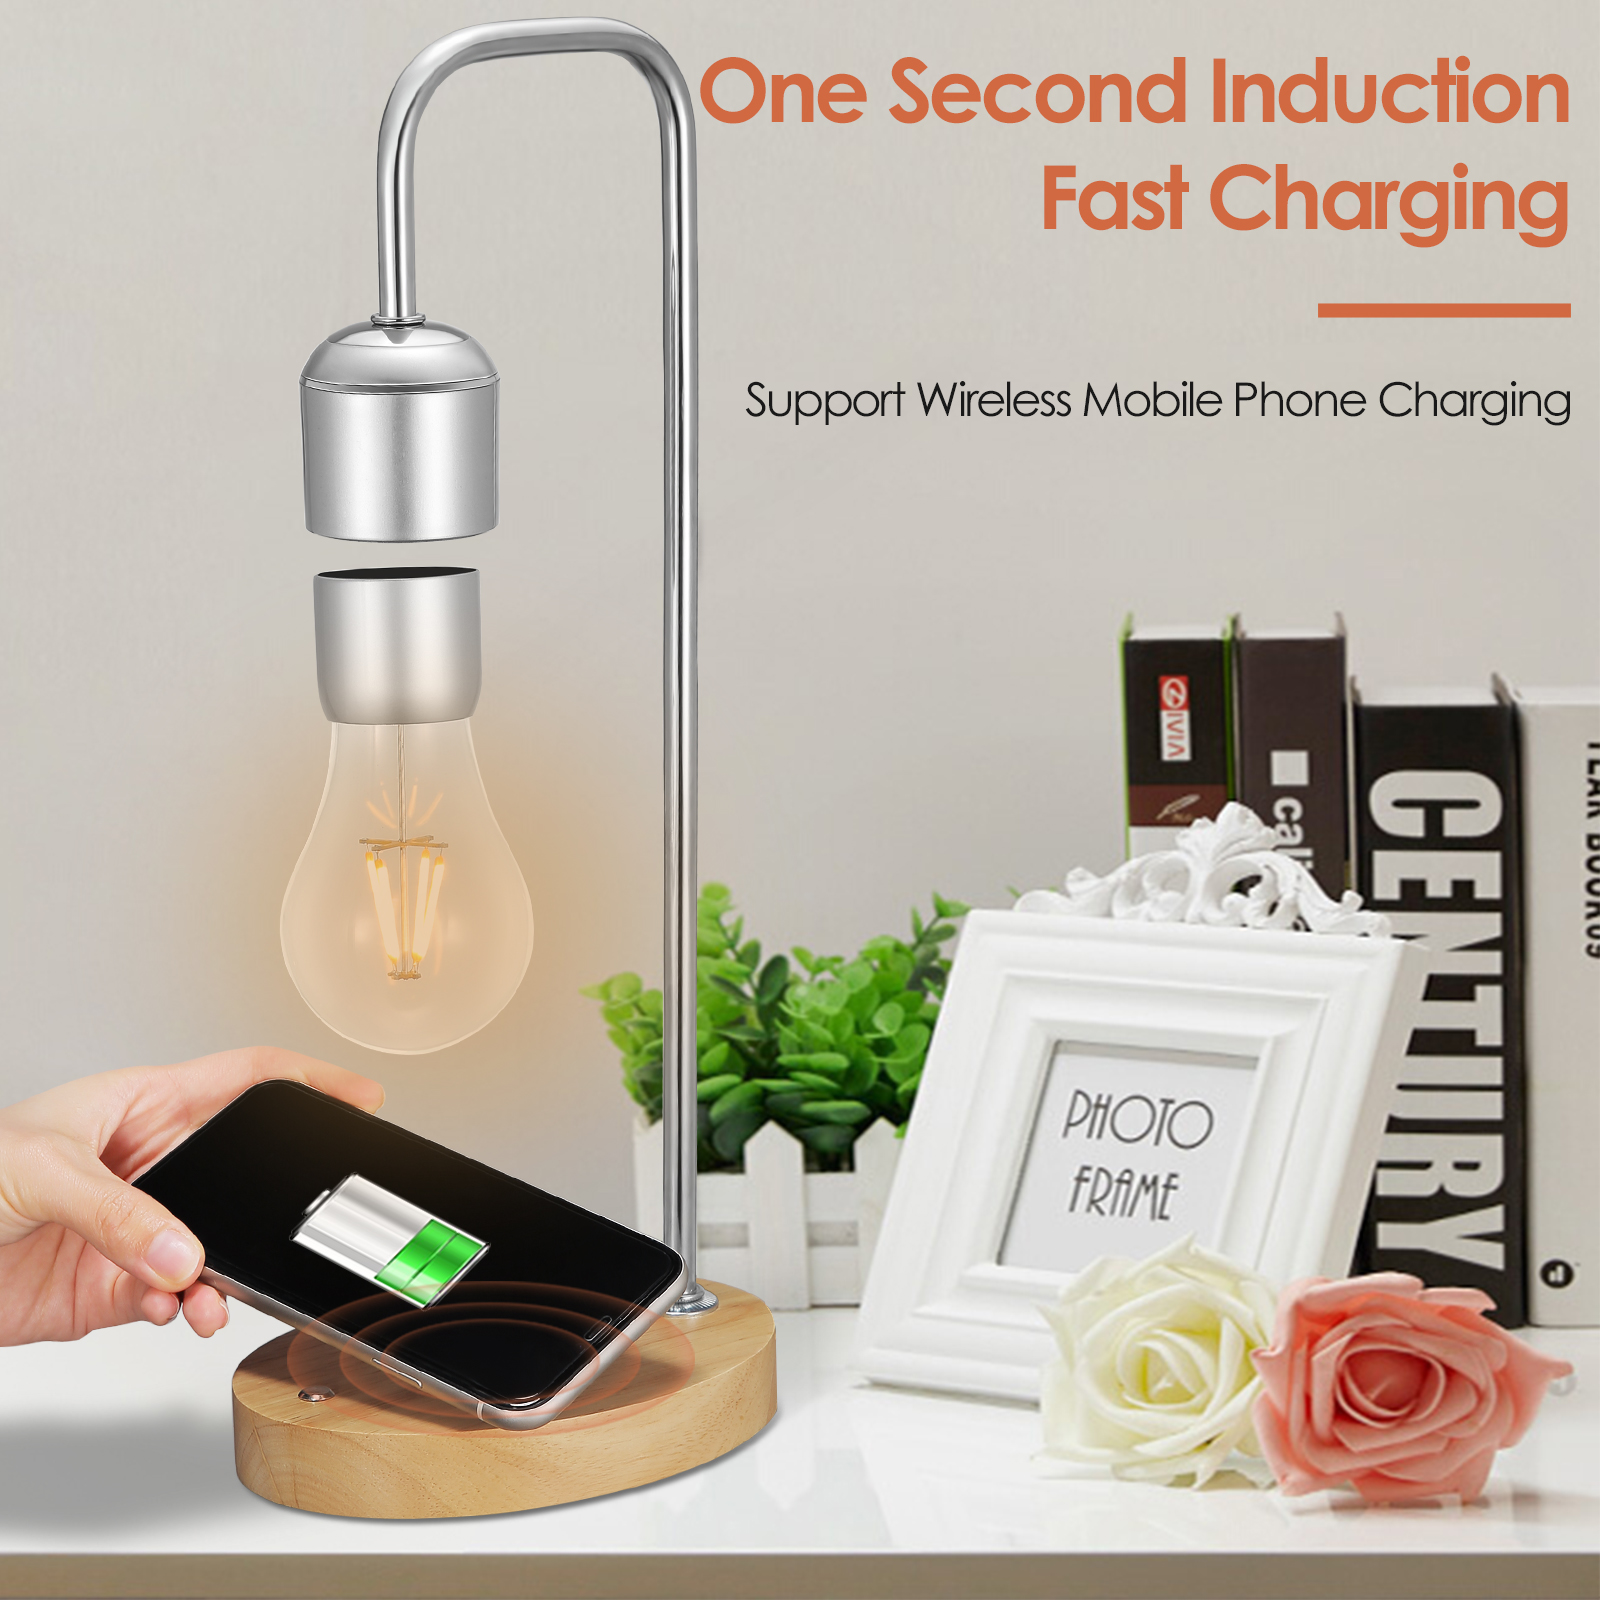 Levitating Lamp Floating fluorescent light bulbs Wireless Charger